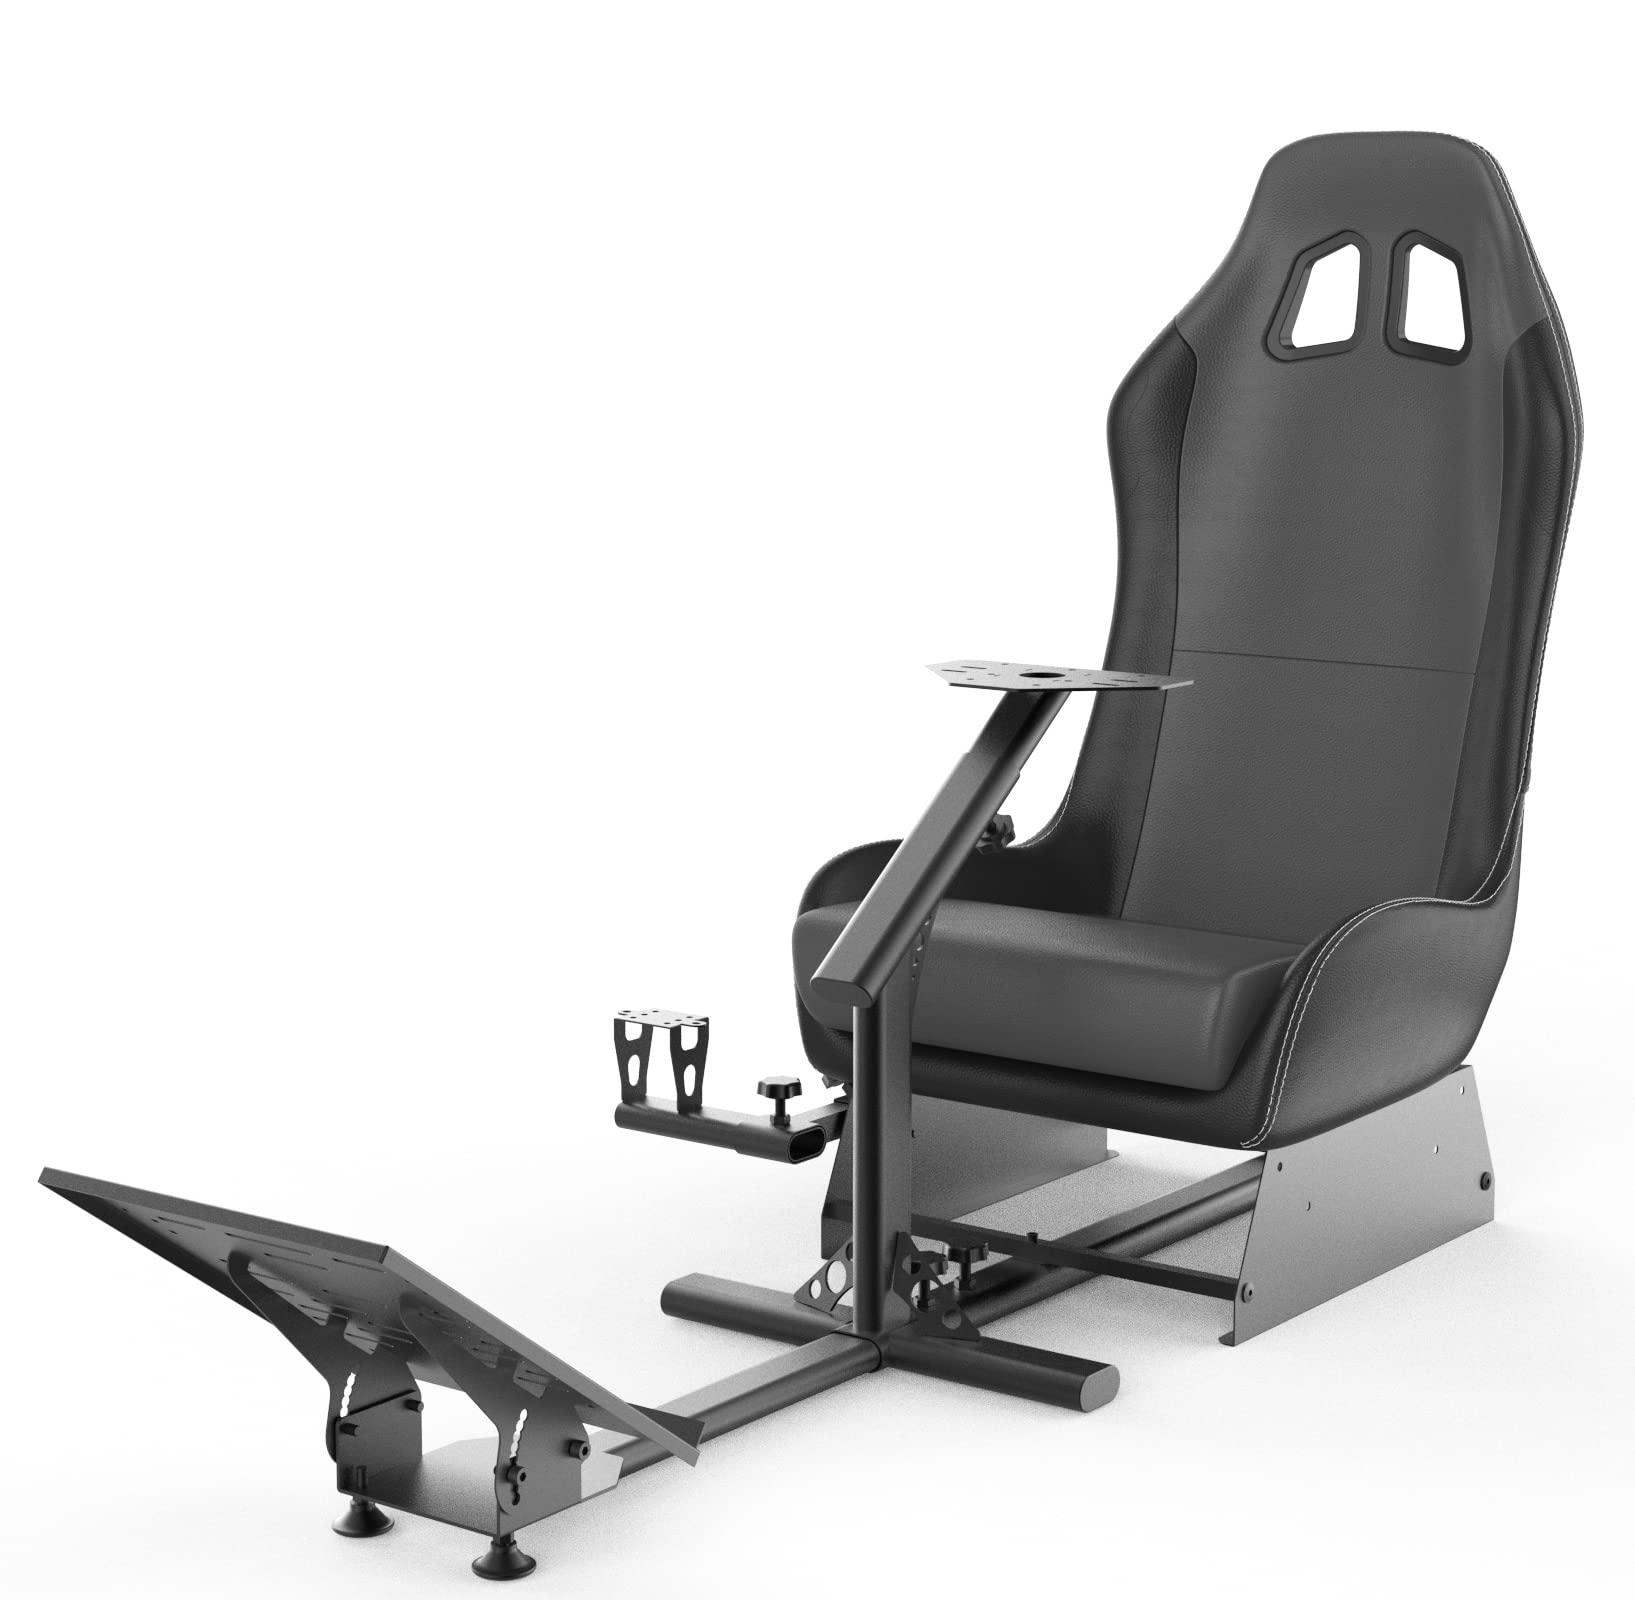 cirearoa Racing Wheel Stand with seat gaming chair driving Cockpit for All Logitech G923 | G29 | G920 | Thrustmaster | Fanatec Wheels | Xbox One, PS4, PC Platforms (Black/Grey)